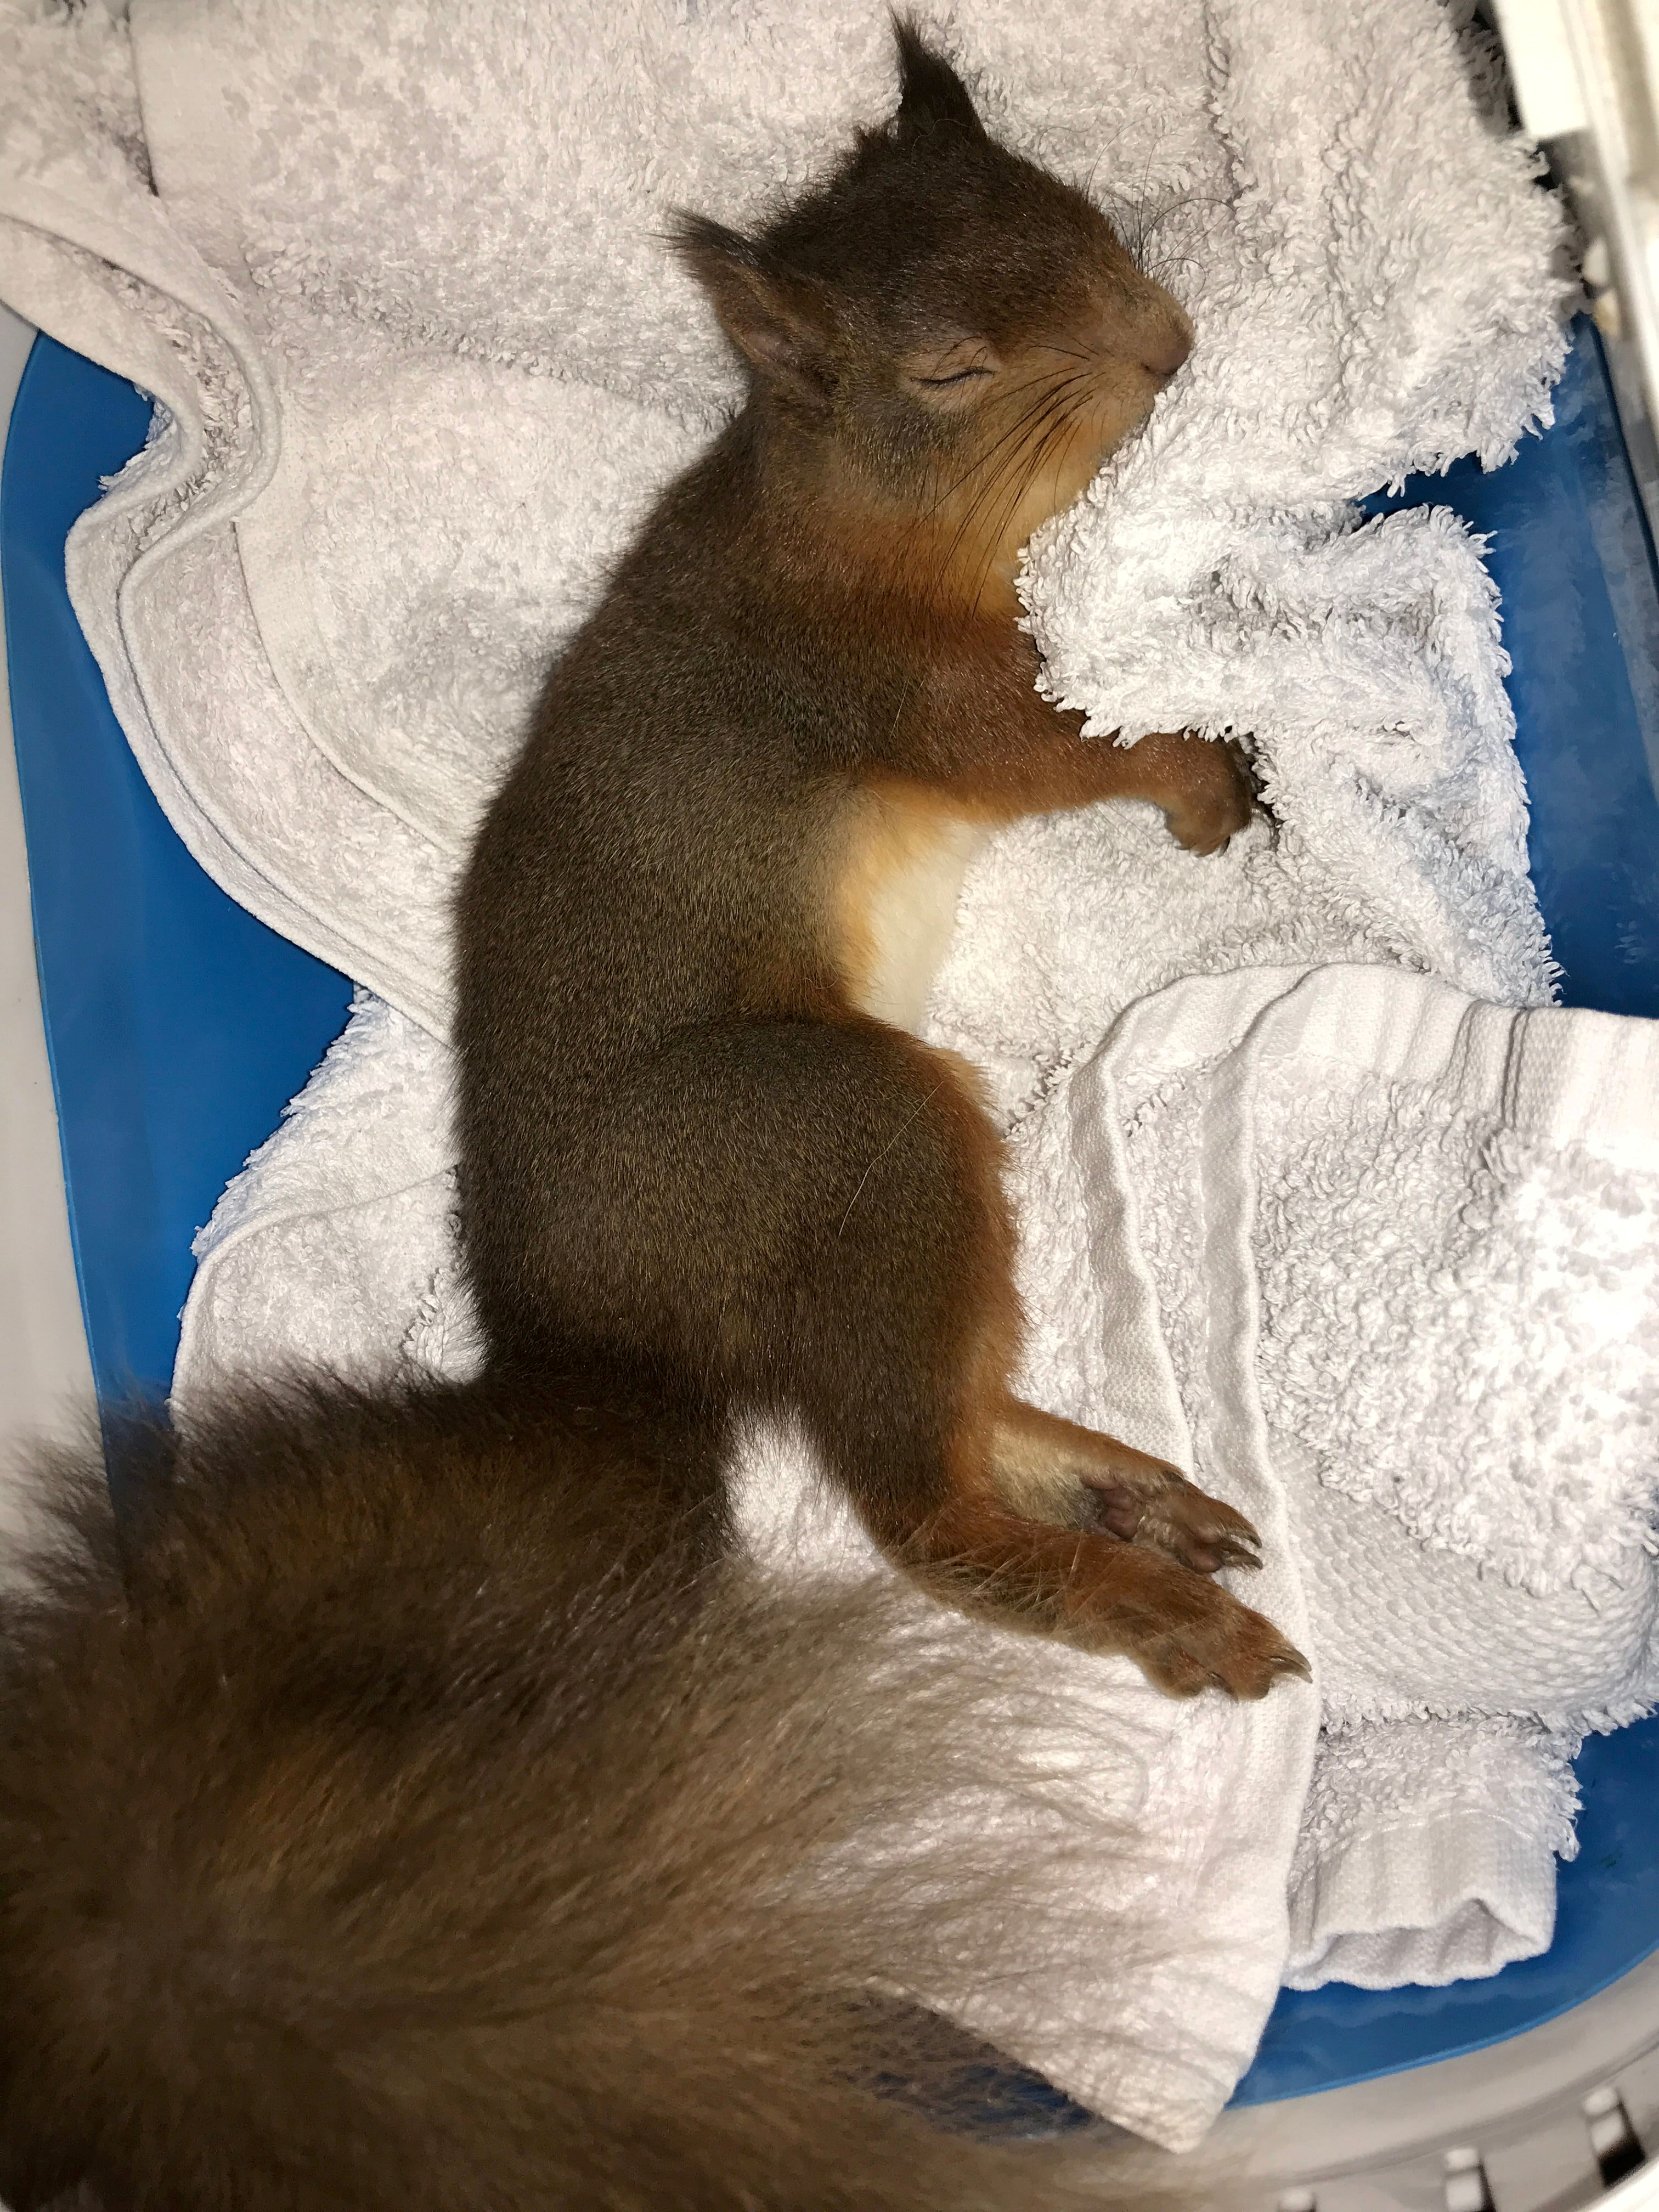 Ted the squirrel may have been struck by a car or fell from a tree.